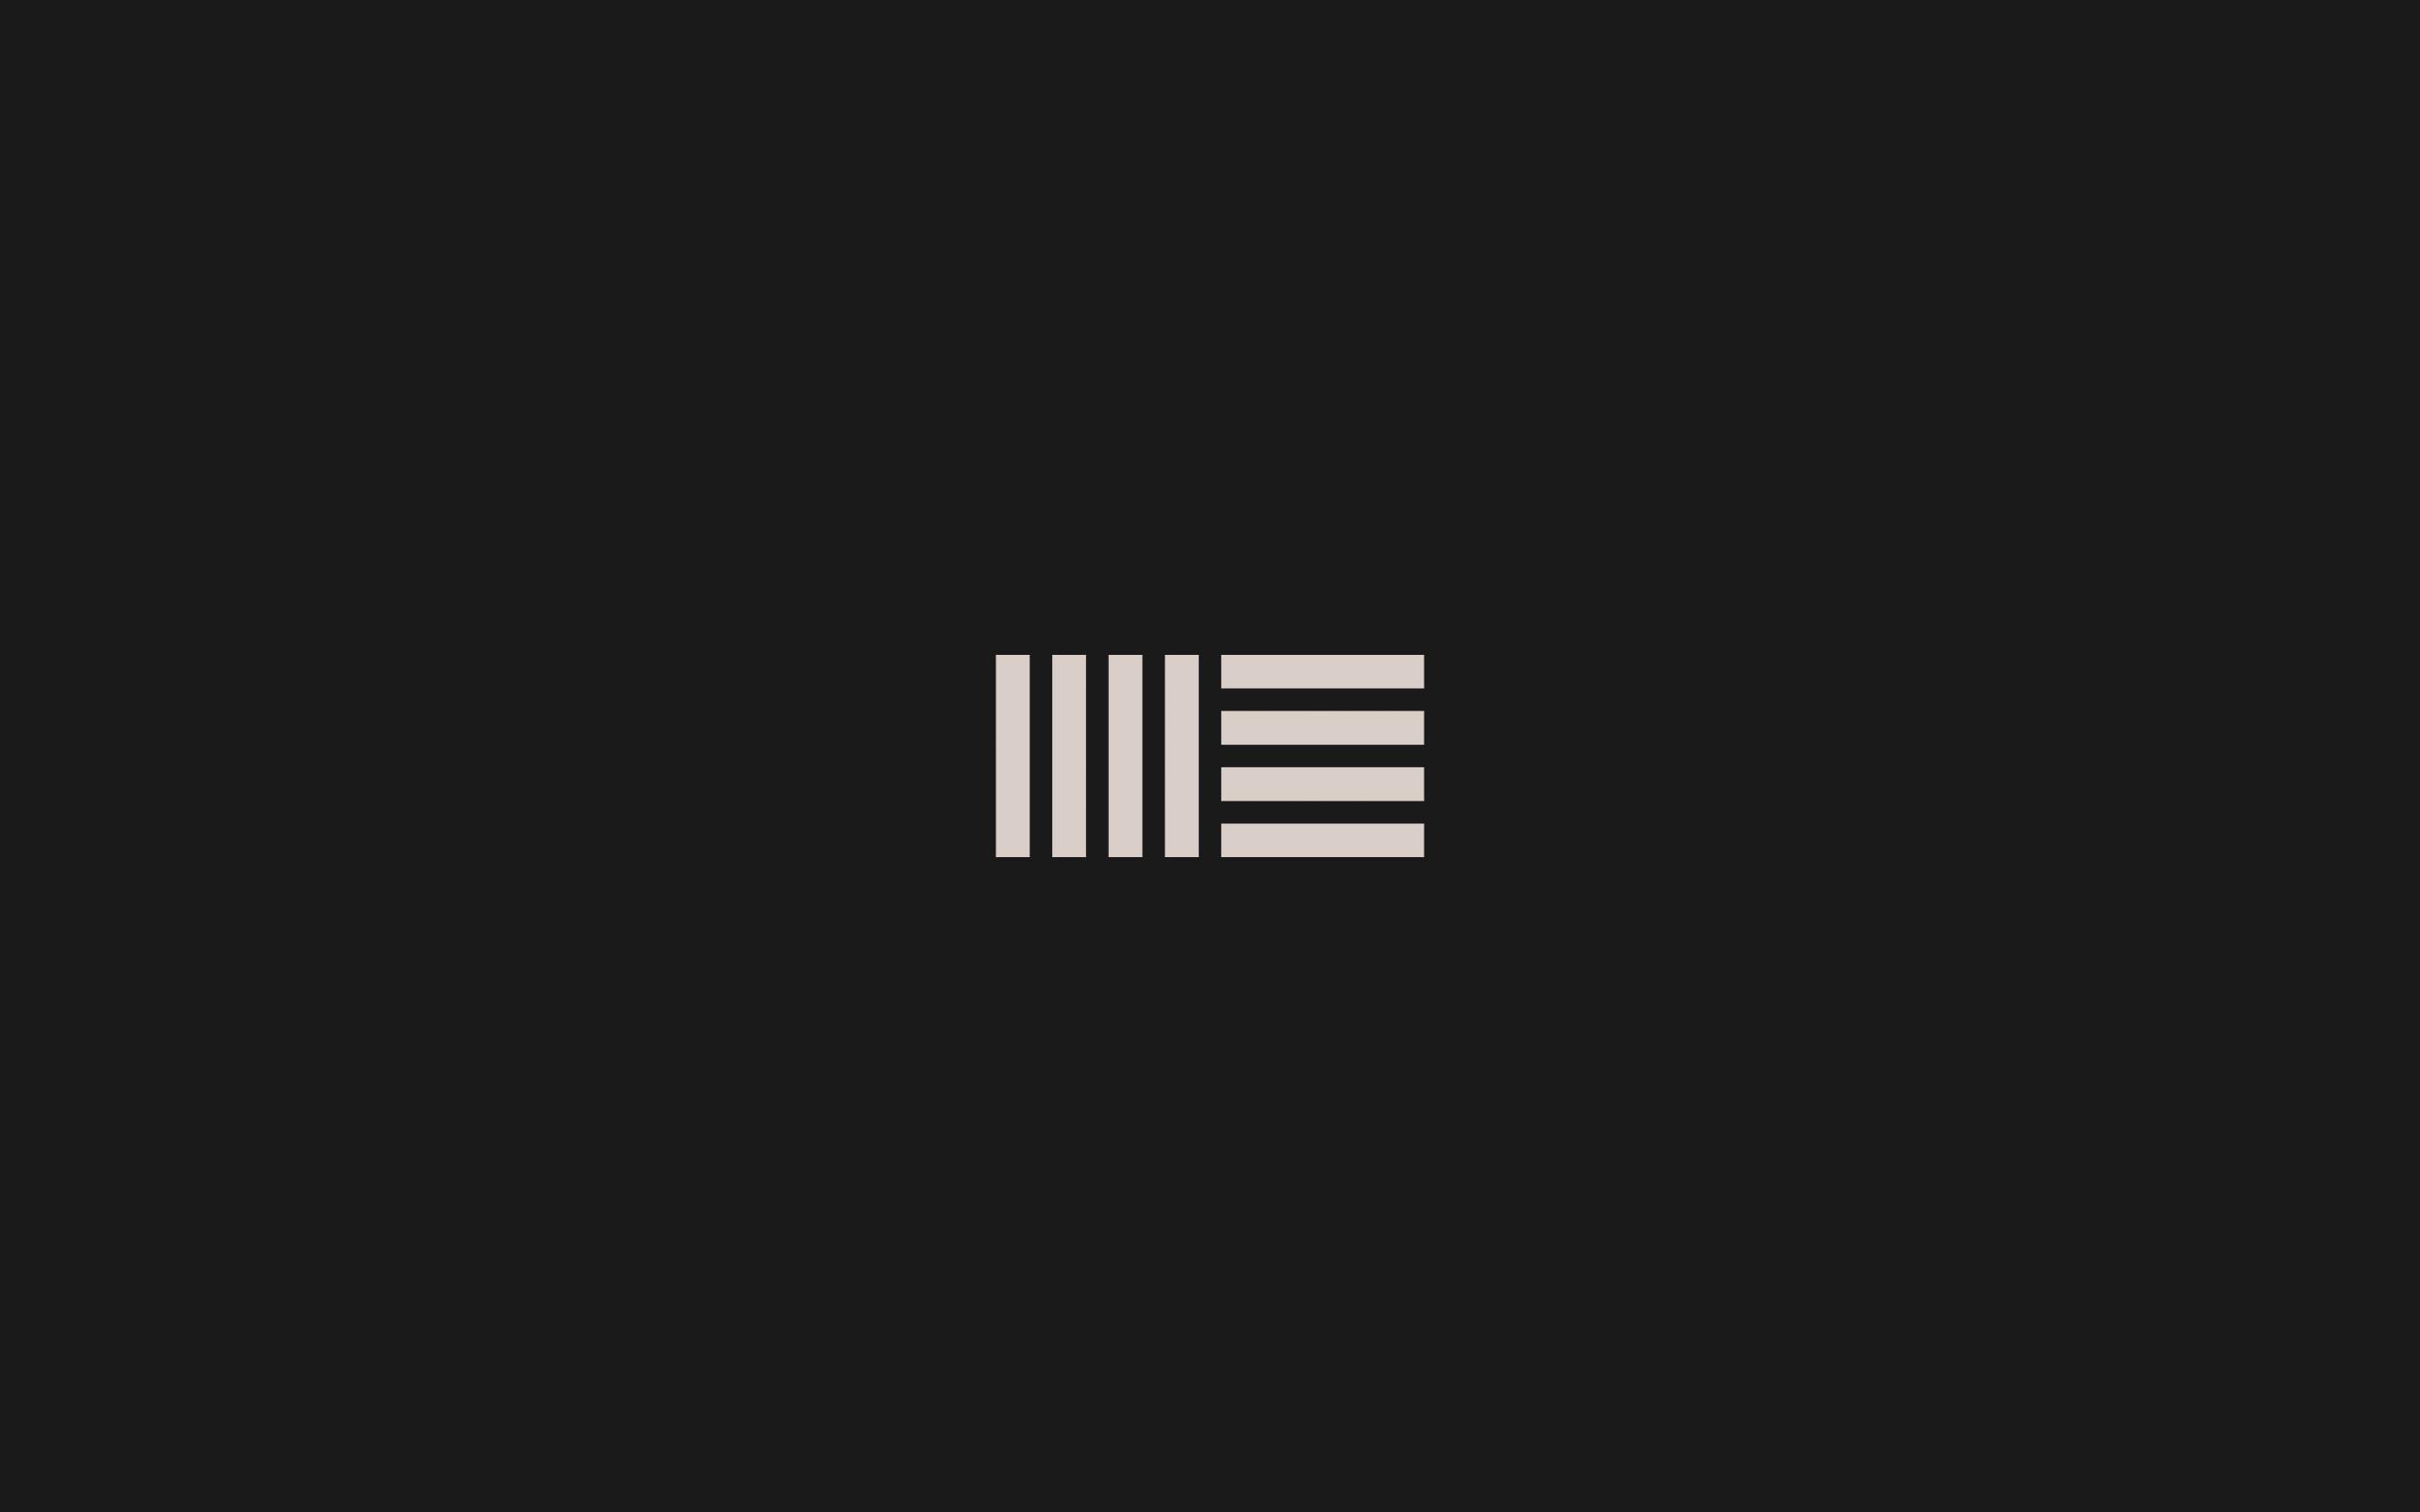 Made A Very Minimalistic Dark Ableton Wallpaper Let Me Know If